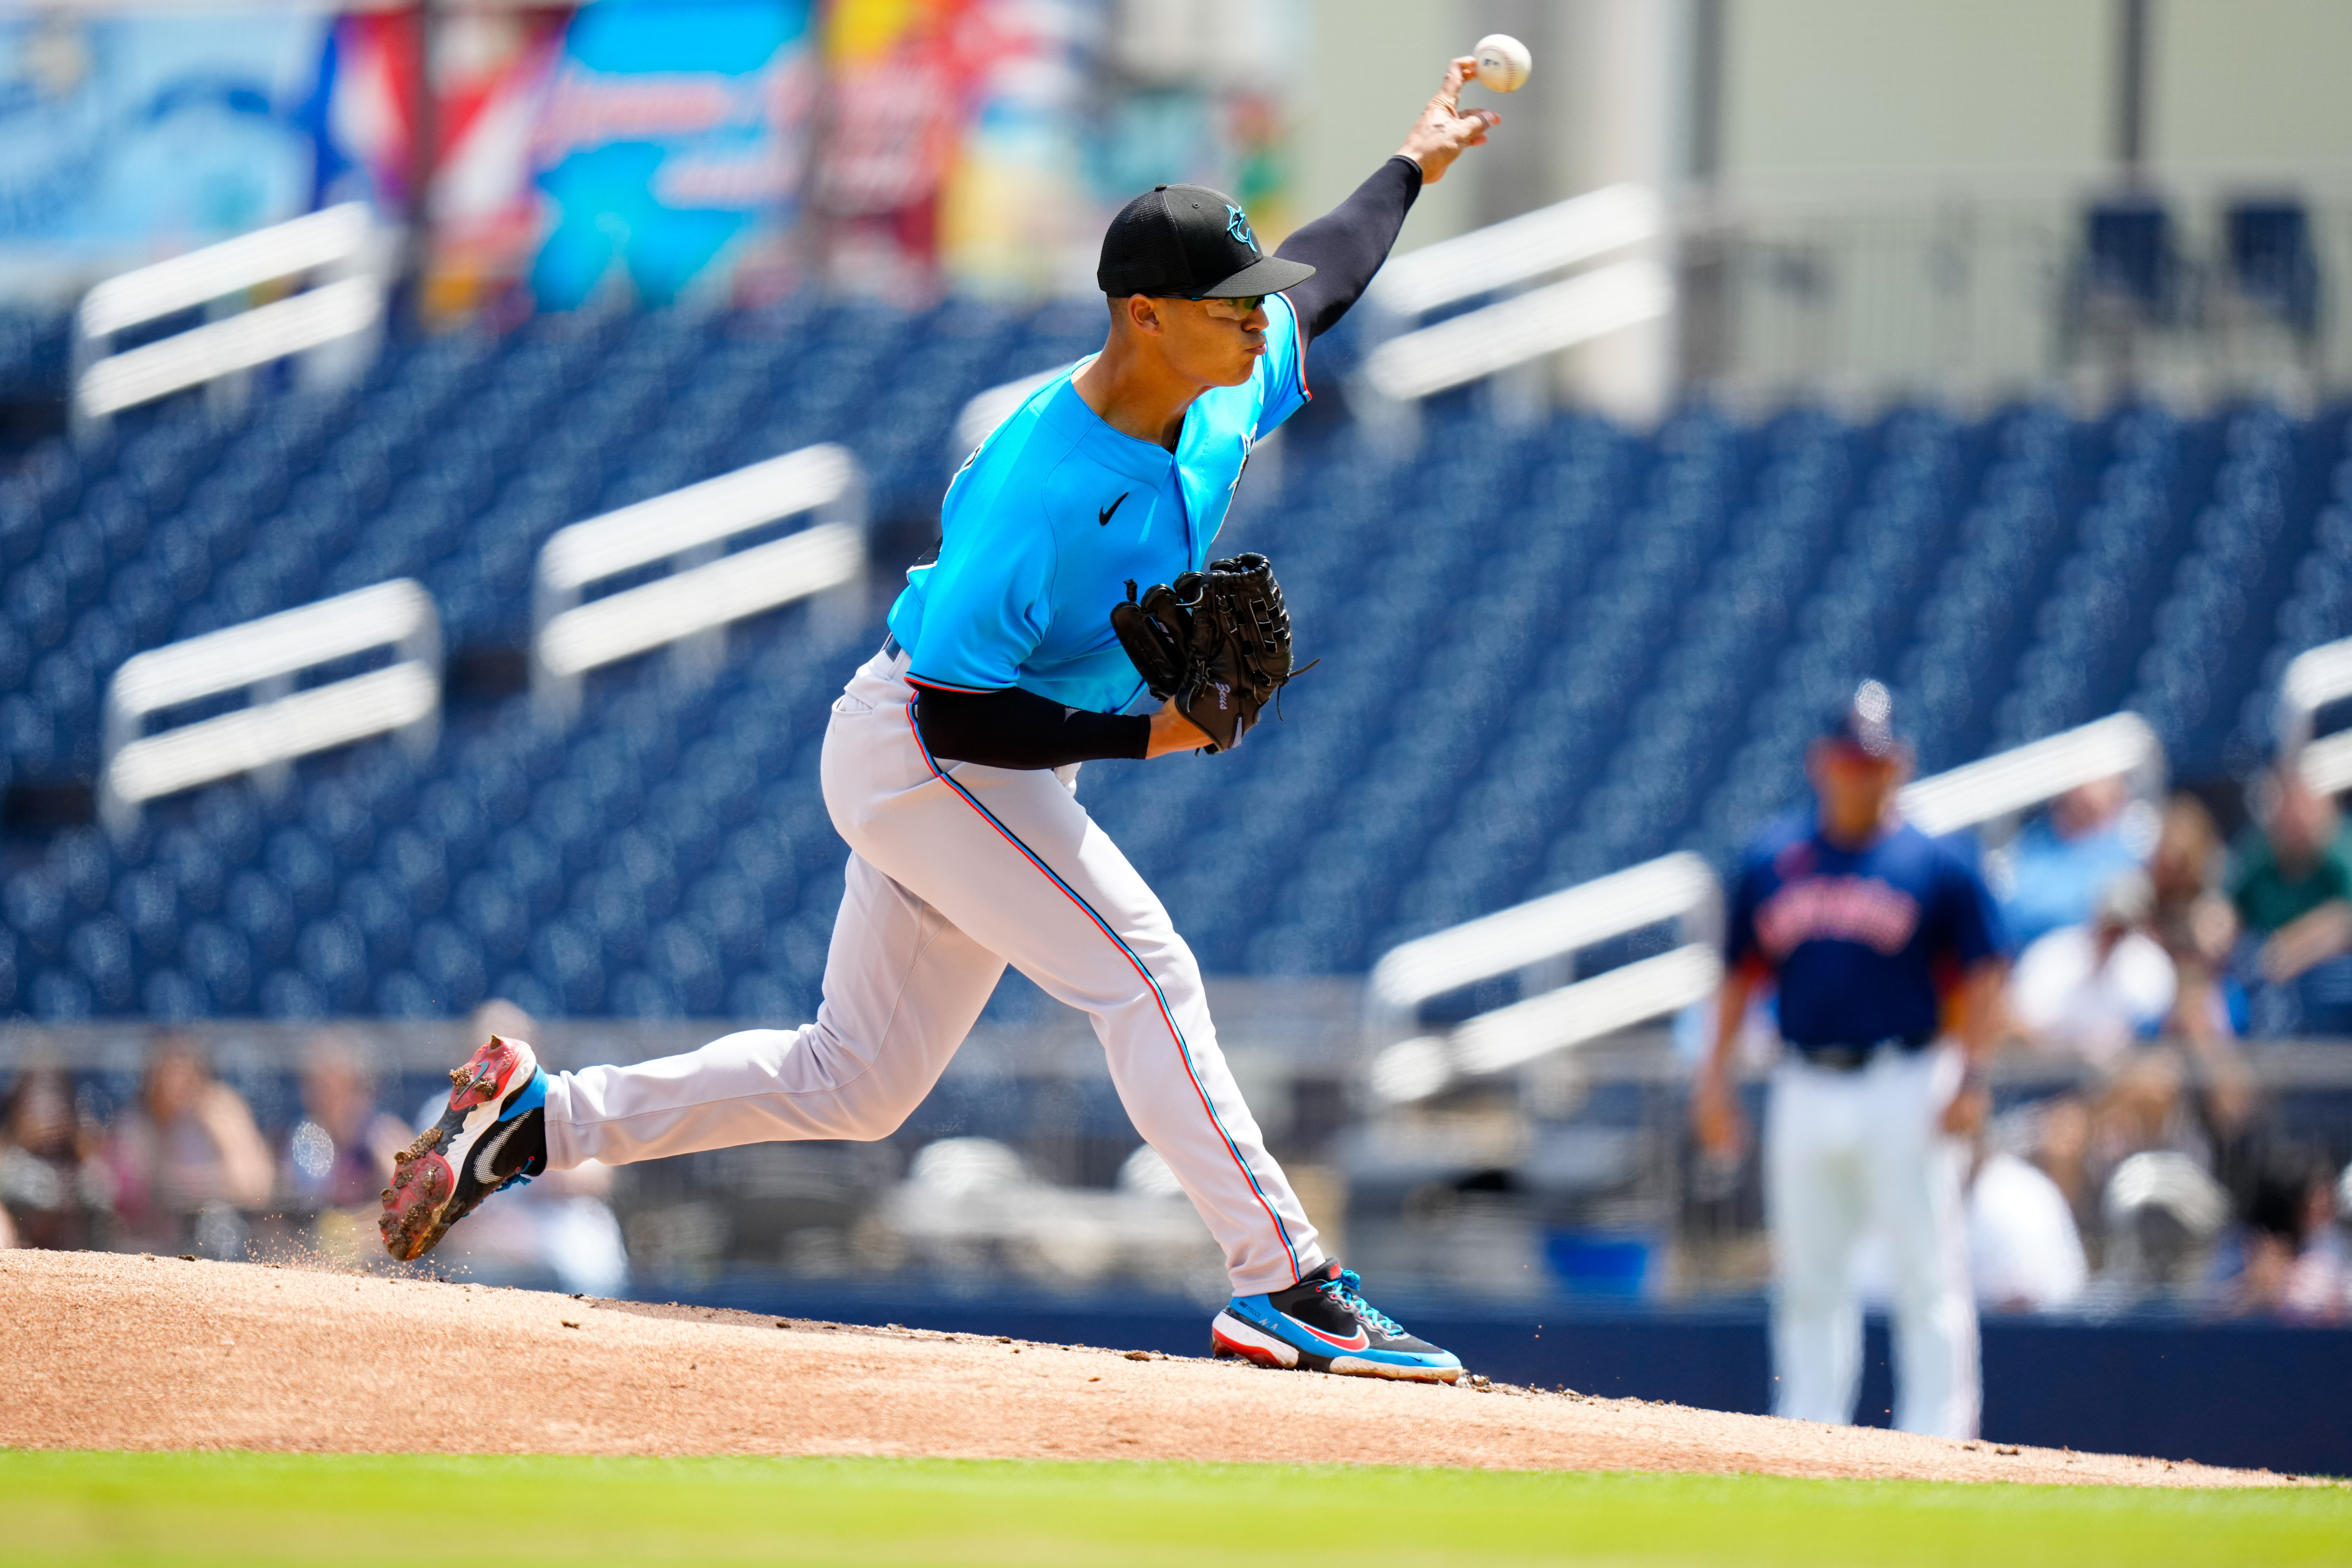 West Palm Beach, Florida, USA; Miami Marlins starting pitcher Jesus Luzardo (44) throws a pitch against the Houston Astros during the first inning at The Ballpark of the Palm Beaches.